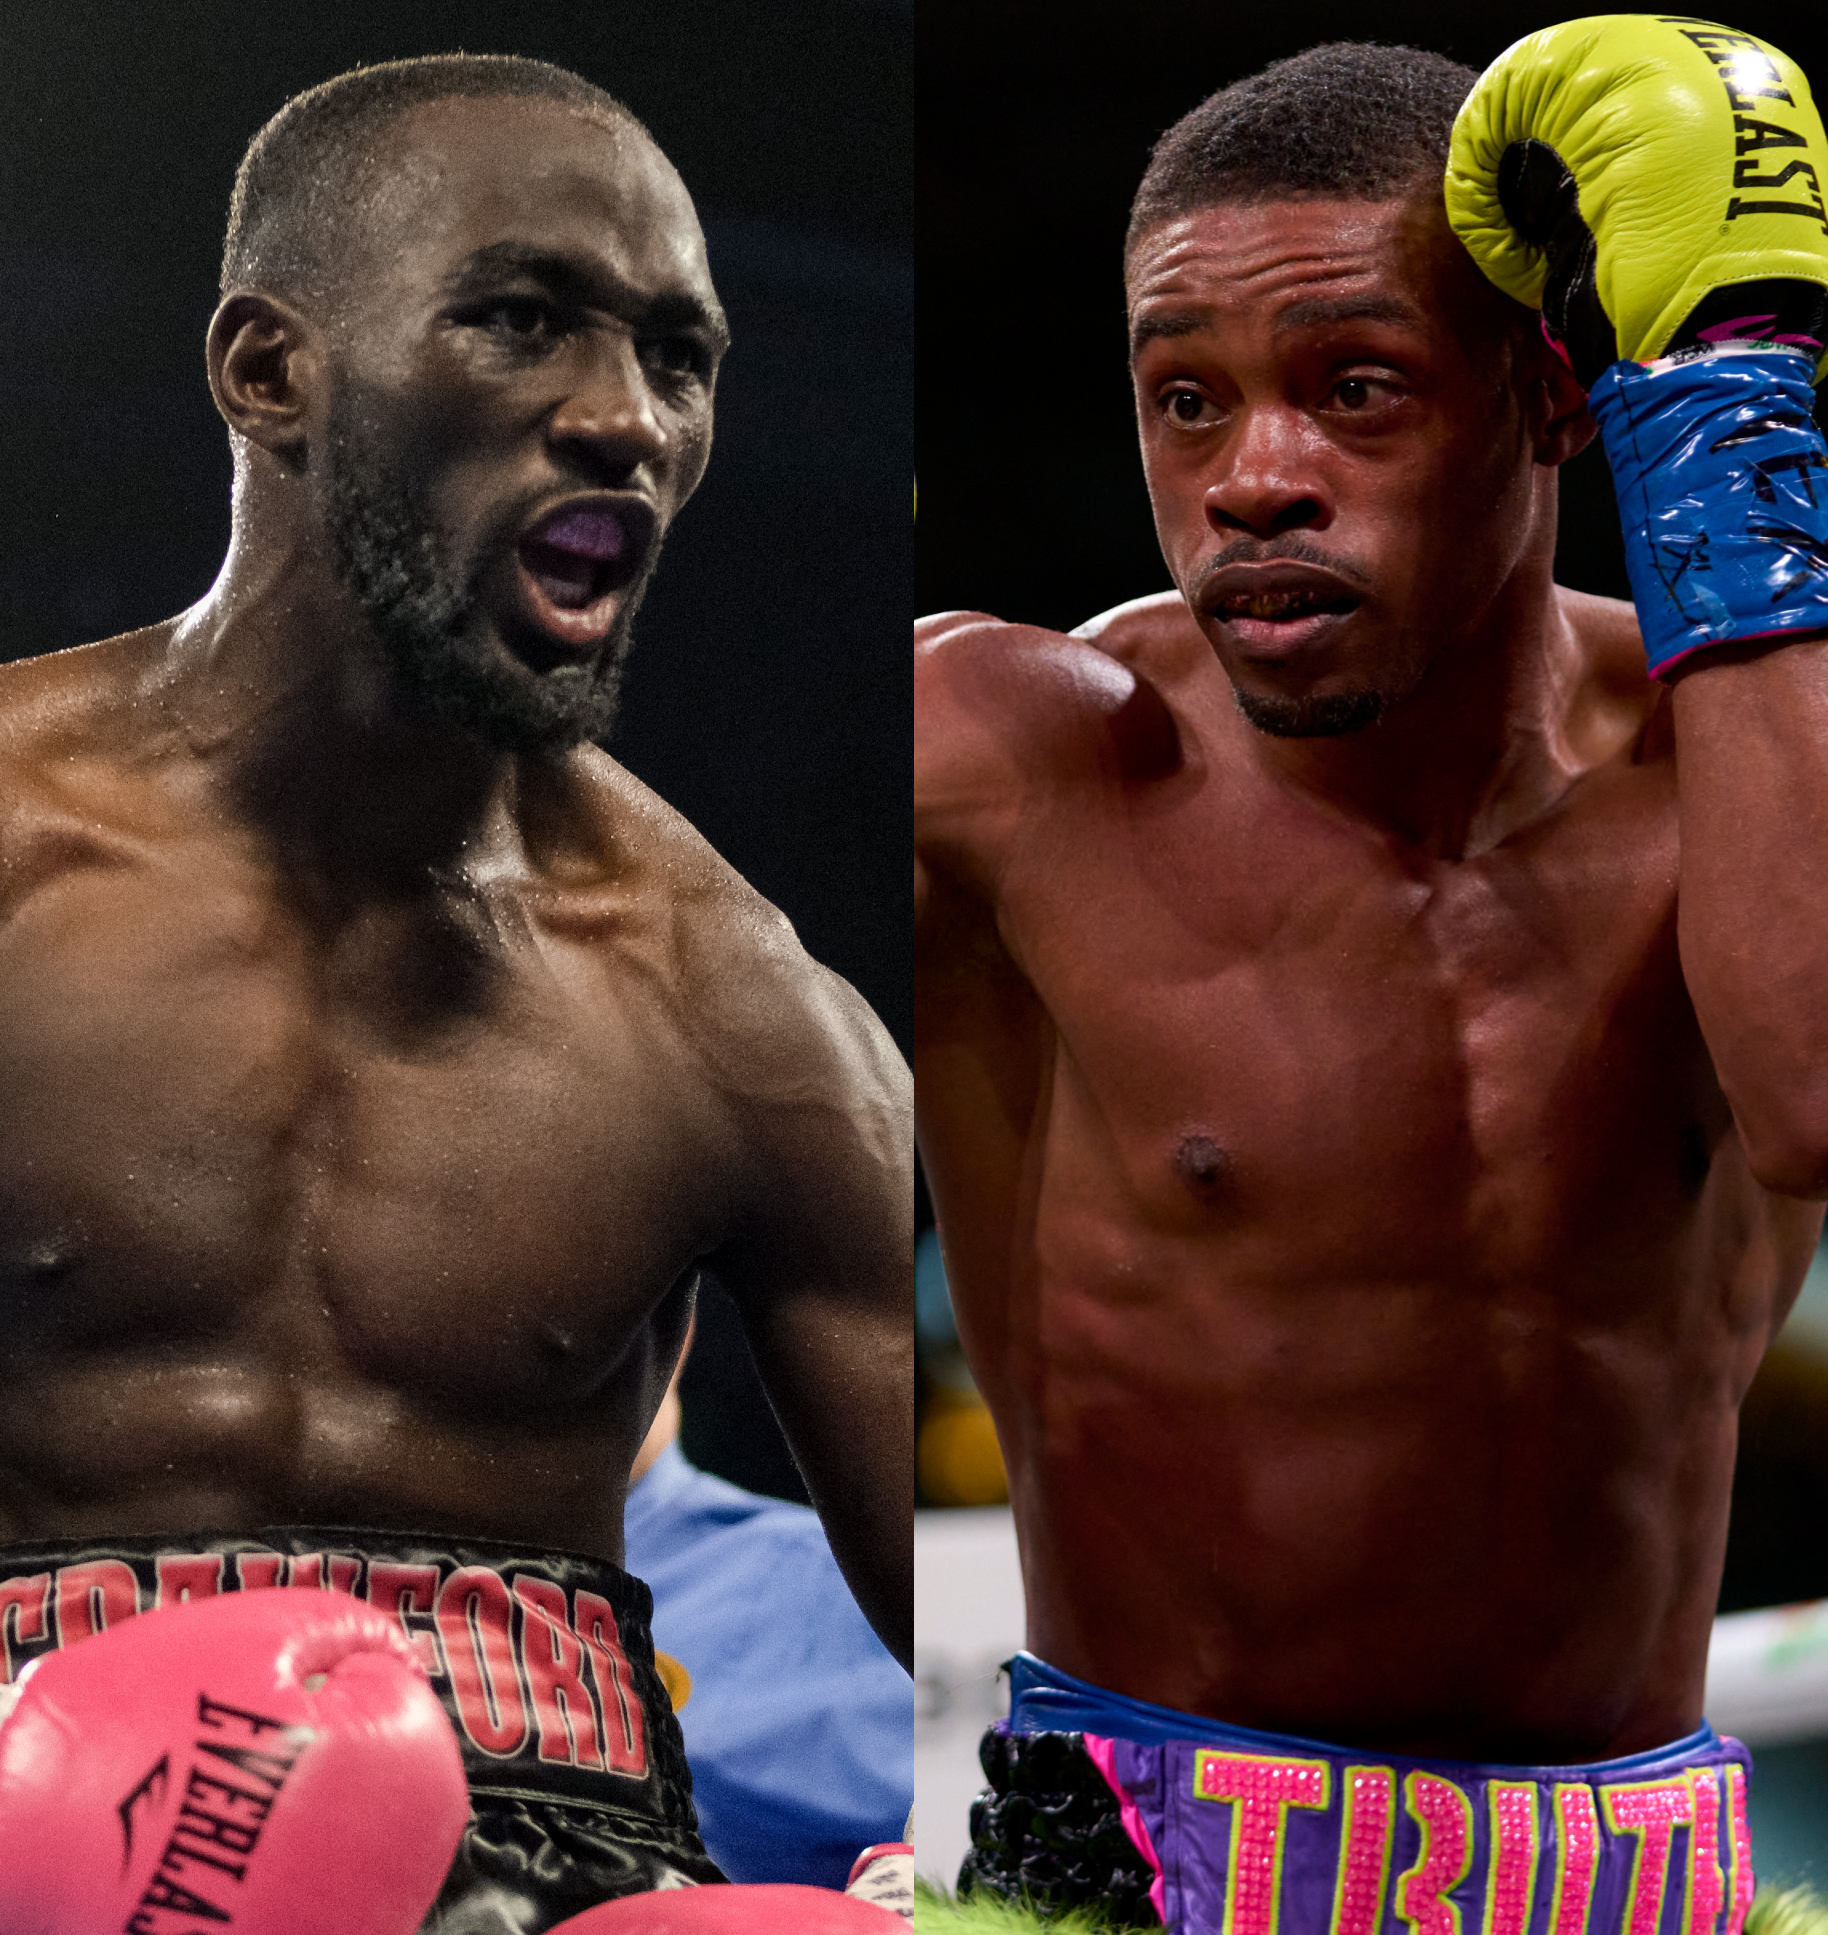 Will we actually see Terence Crawford and Errol Spence Jr fight in 2022?